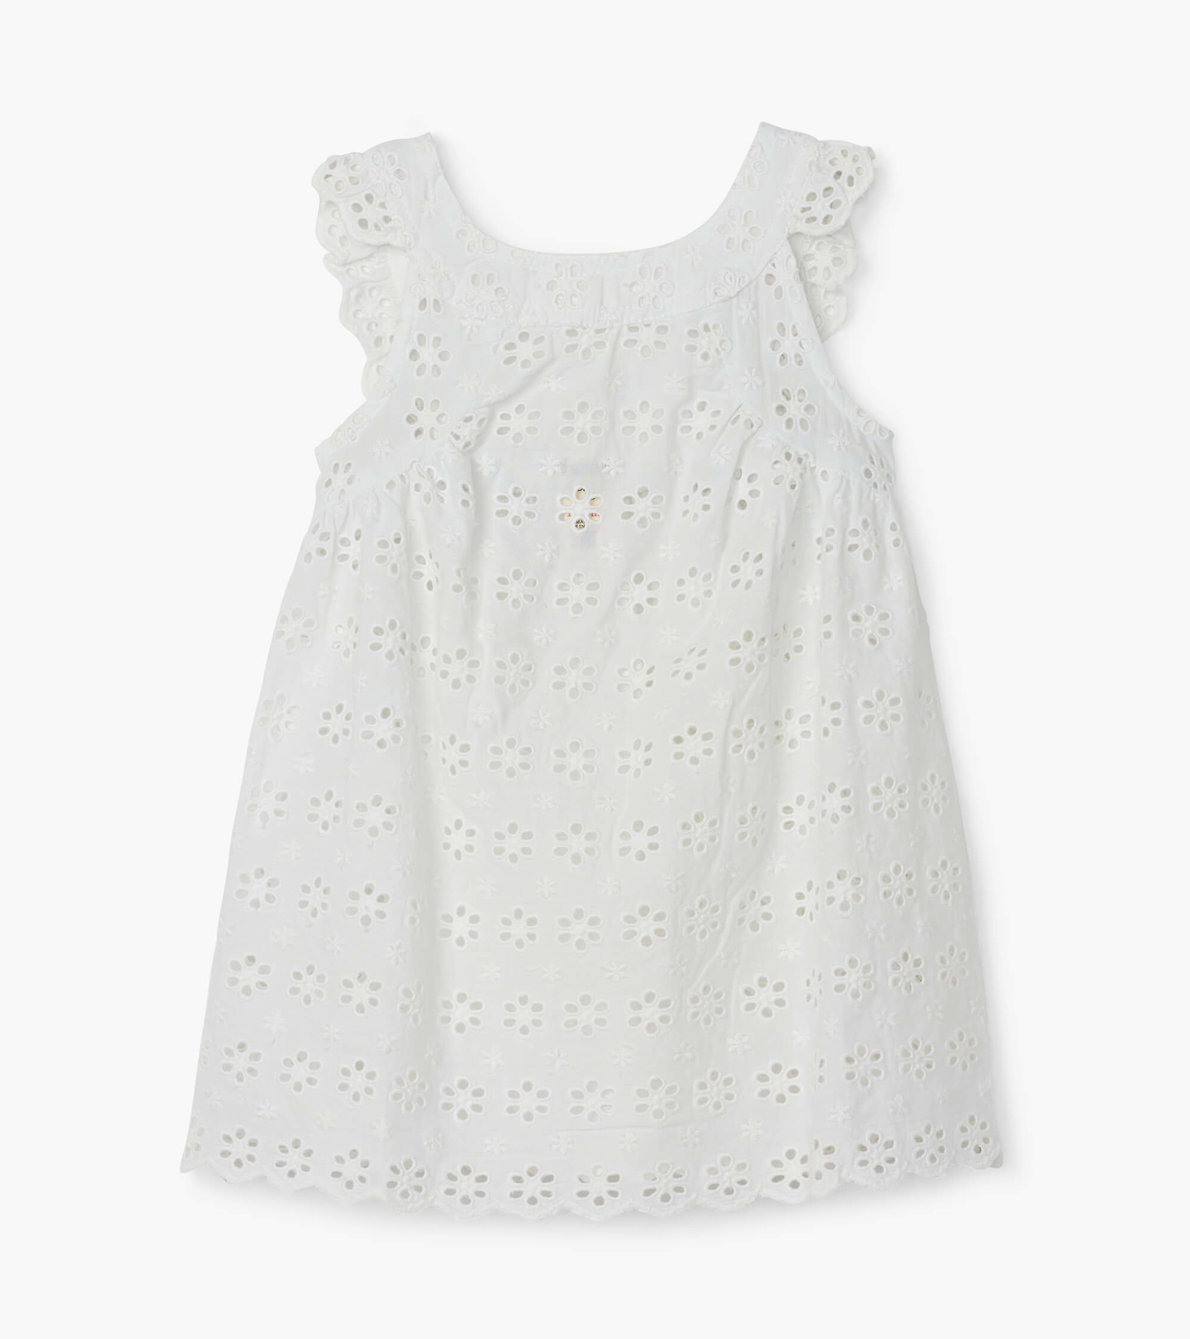 View larger image of Spring Blossoms Baby Eyelet Dress